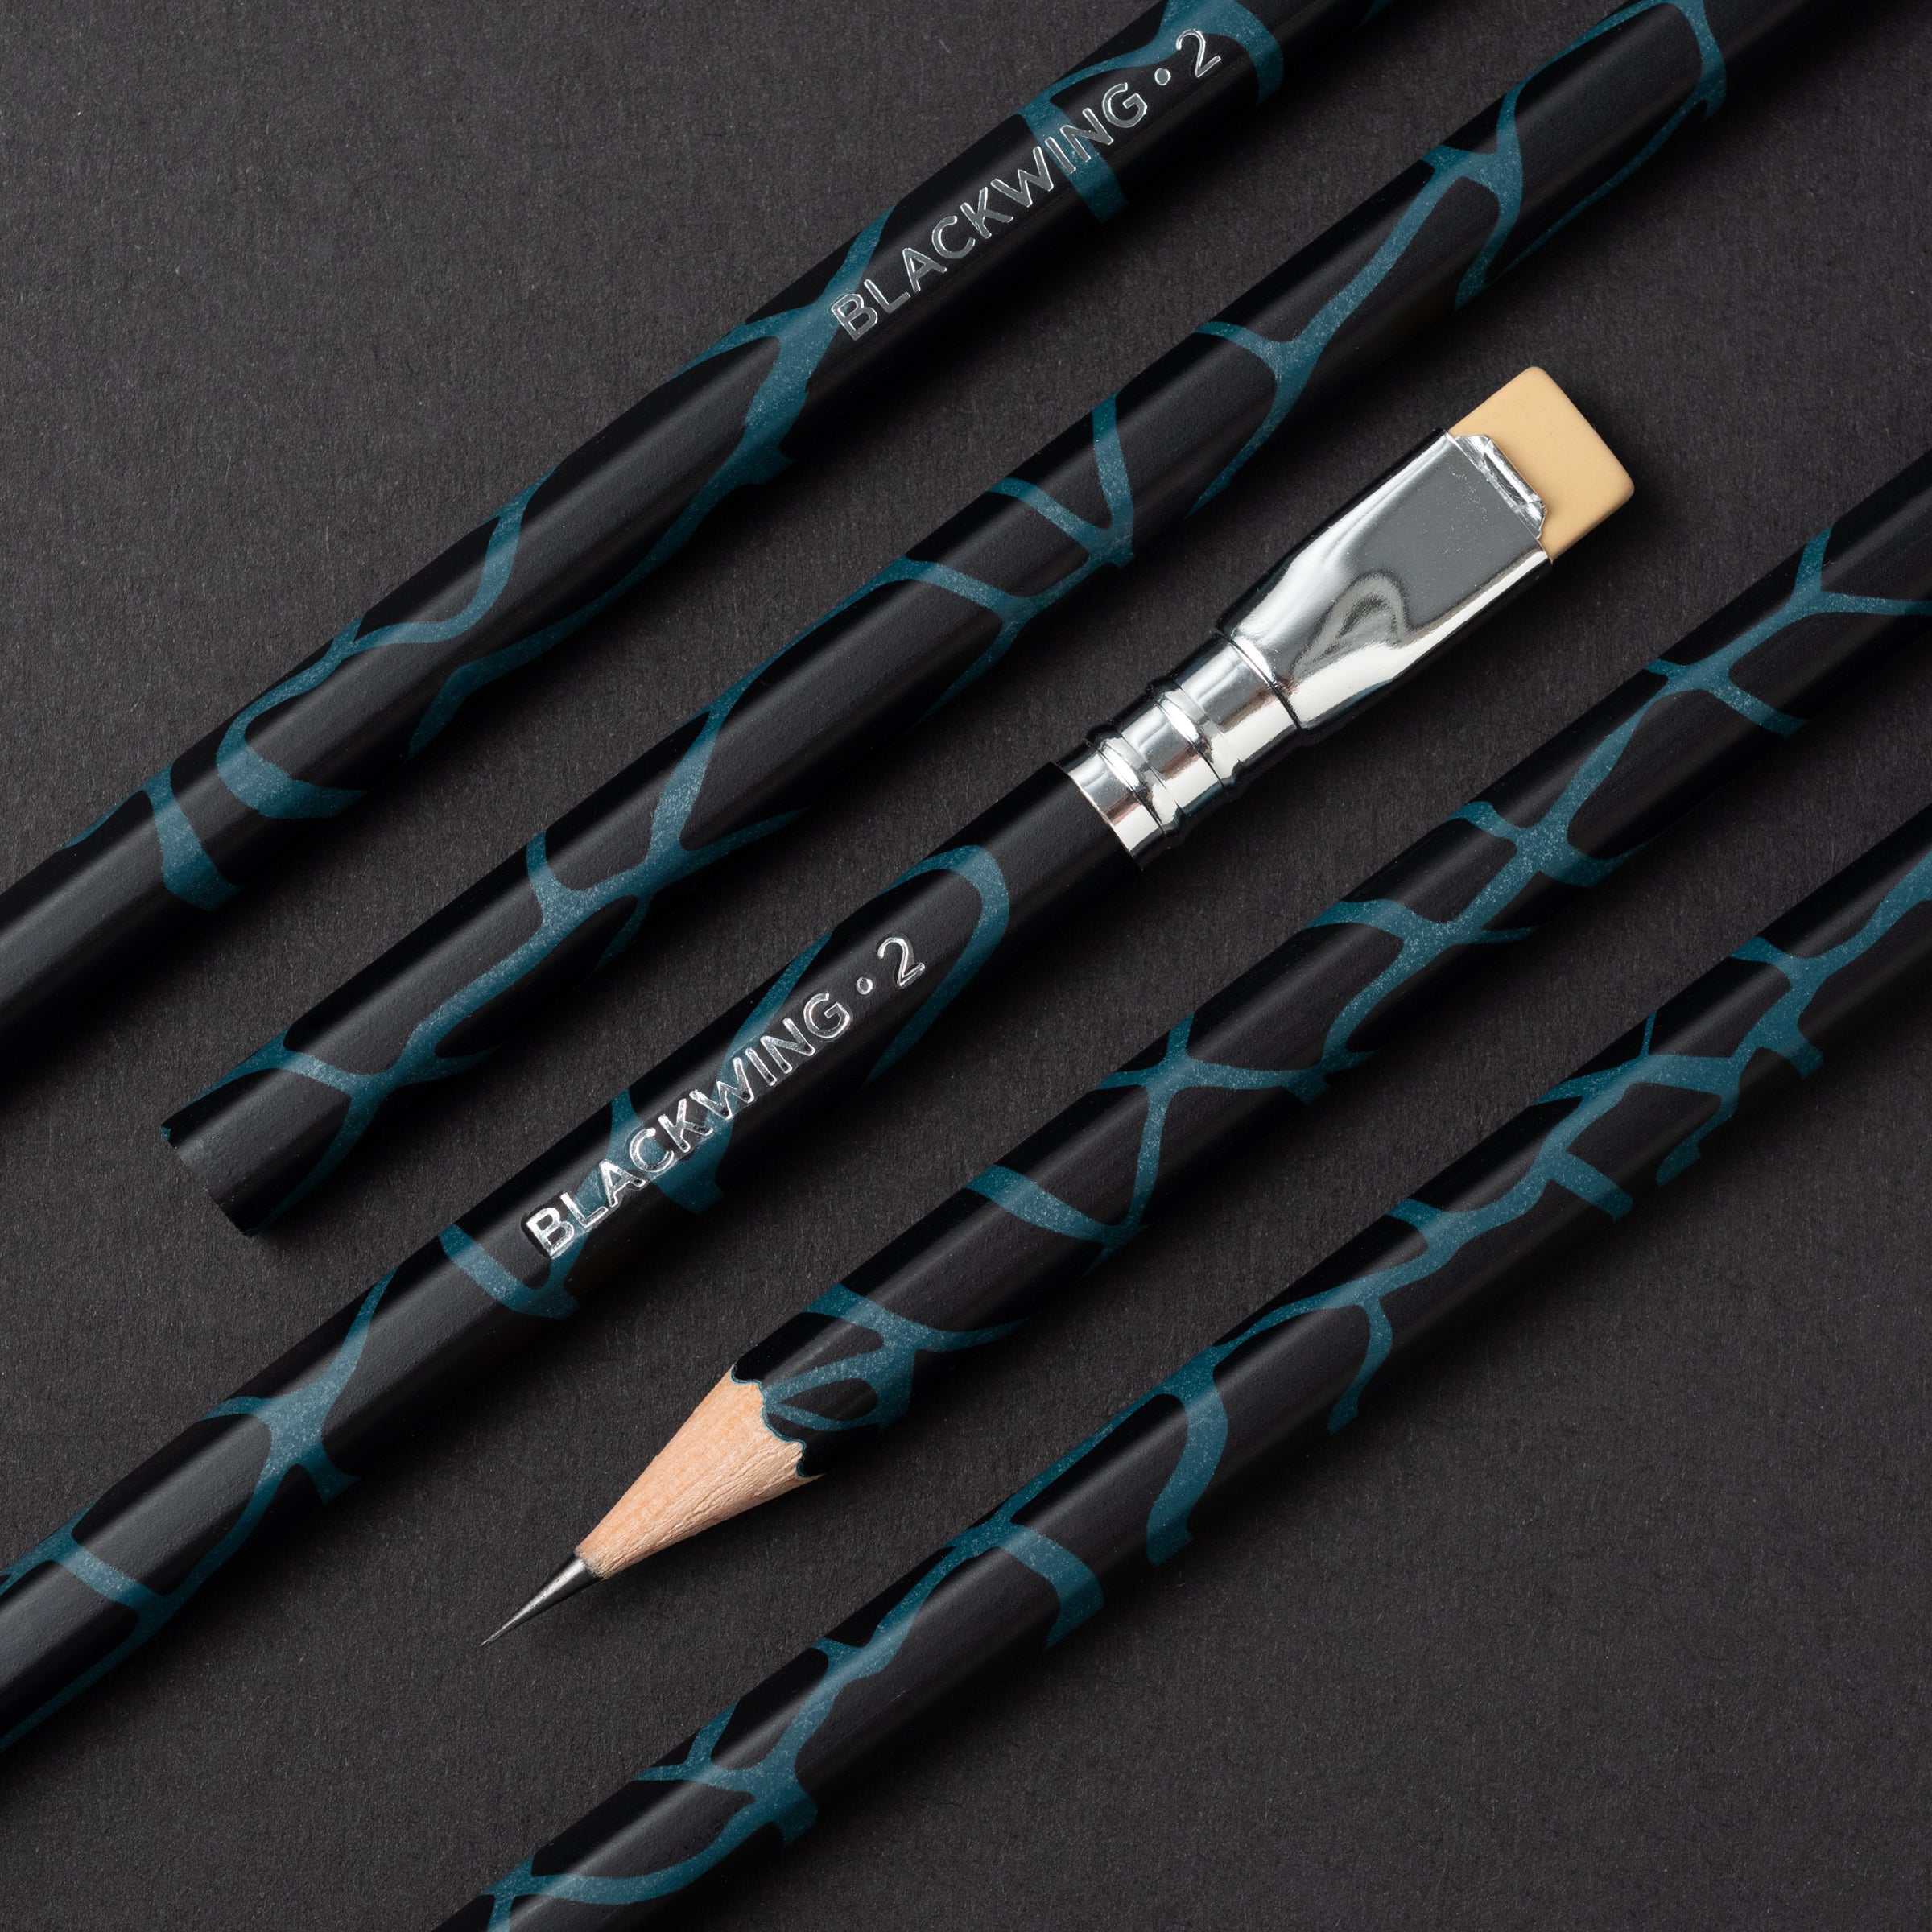 A set of Blackwing Volume 2 (Set of 12) including pencils and a brush.